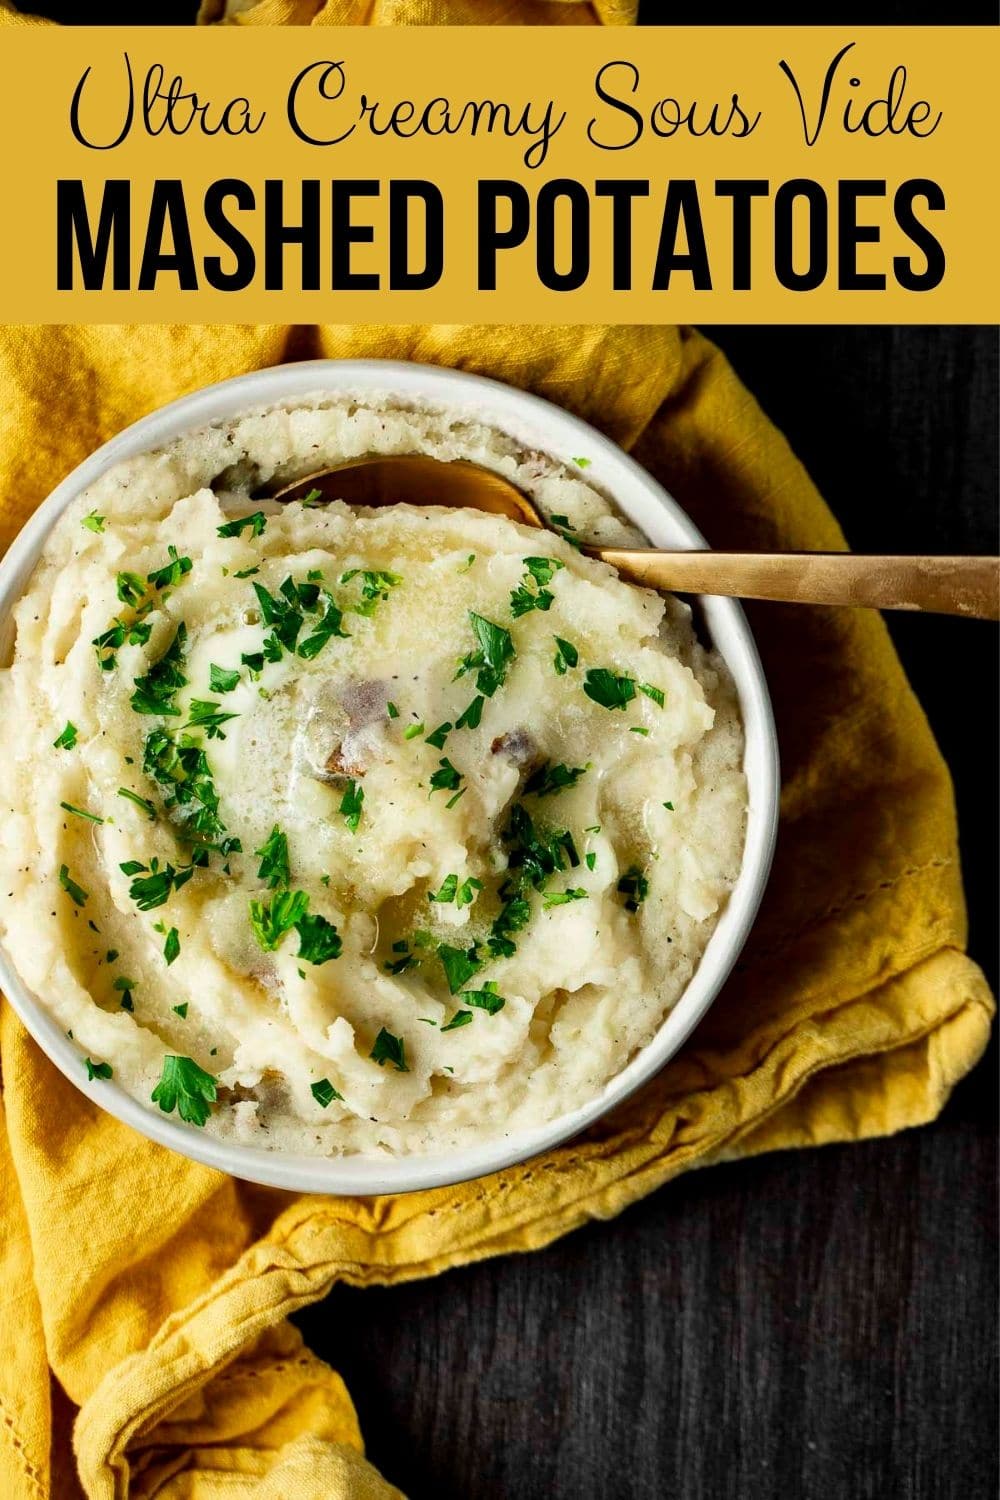 https://www.wenthere8this.com/wp-content/uploads/2021/11/Sous-Vide-Mashed-Potatoes-PINTEREST3.jpg